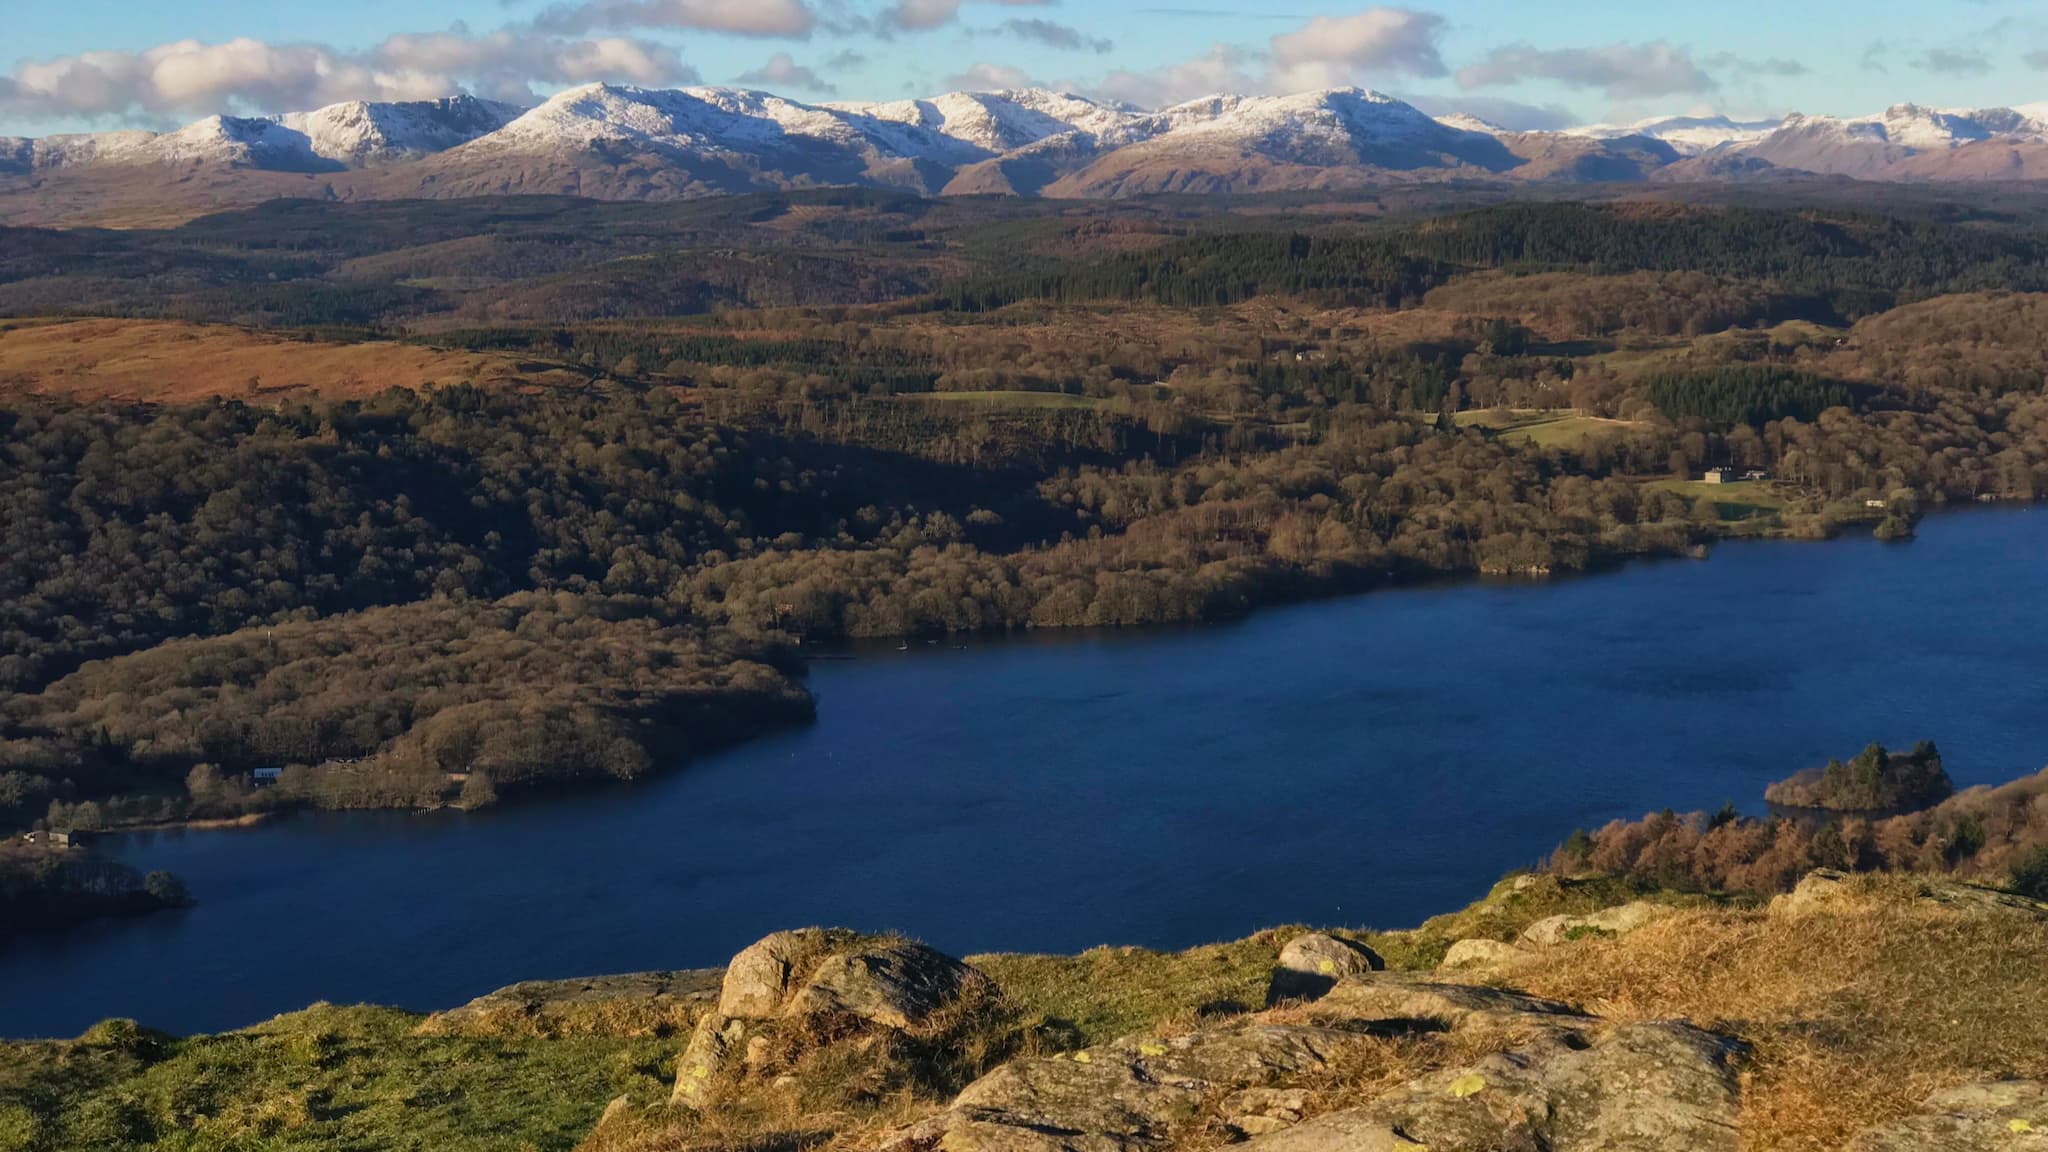 The view looking west from from the summit of Gummer's How, looking at the snow-topped fells of the Lake District, especially the Coniston fells